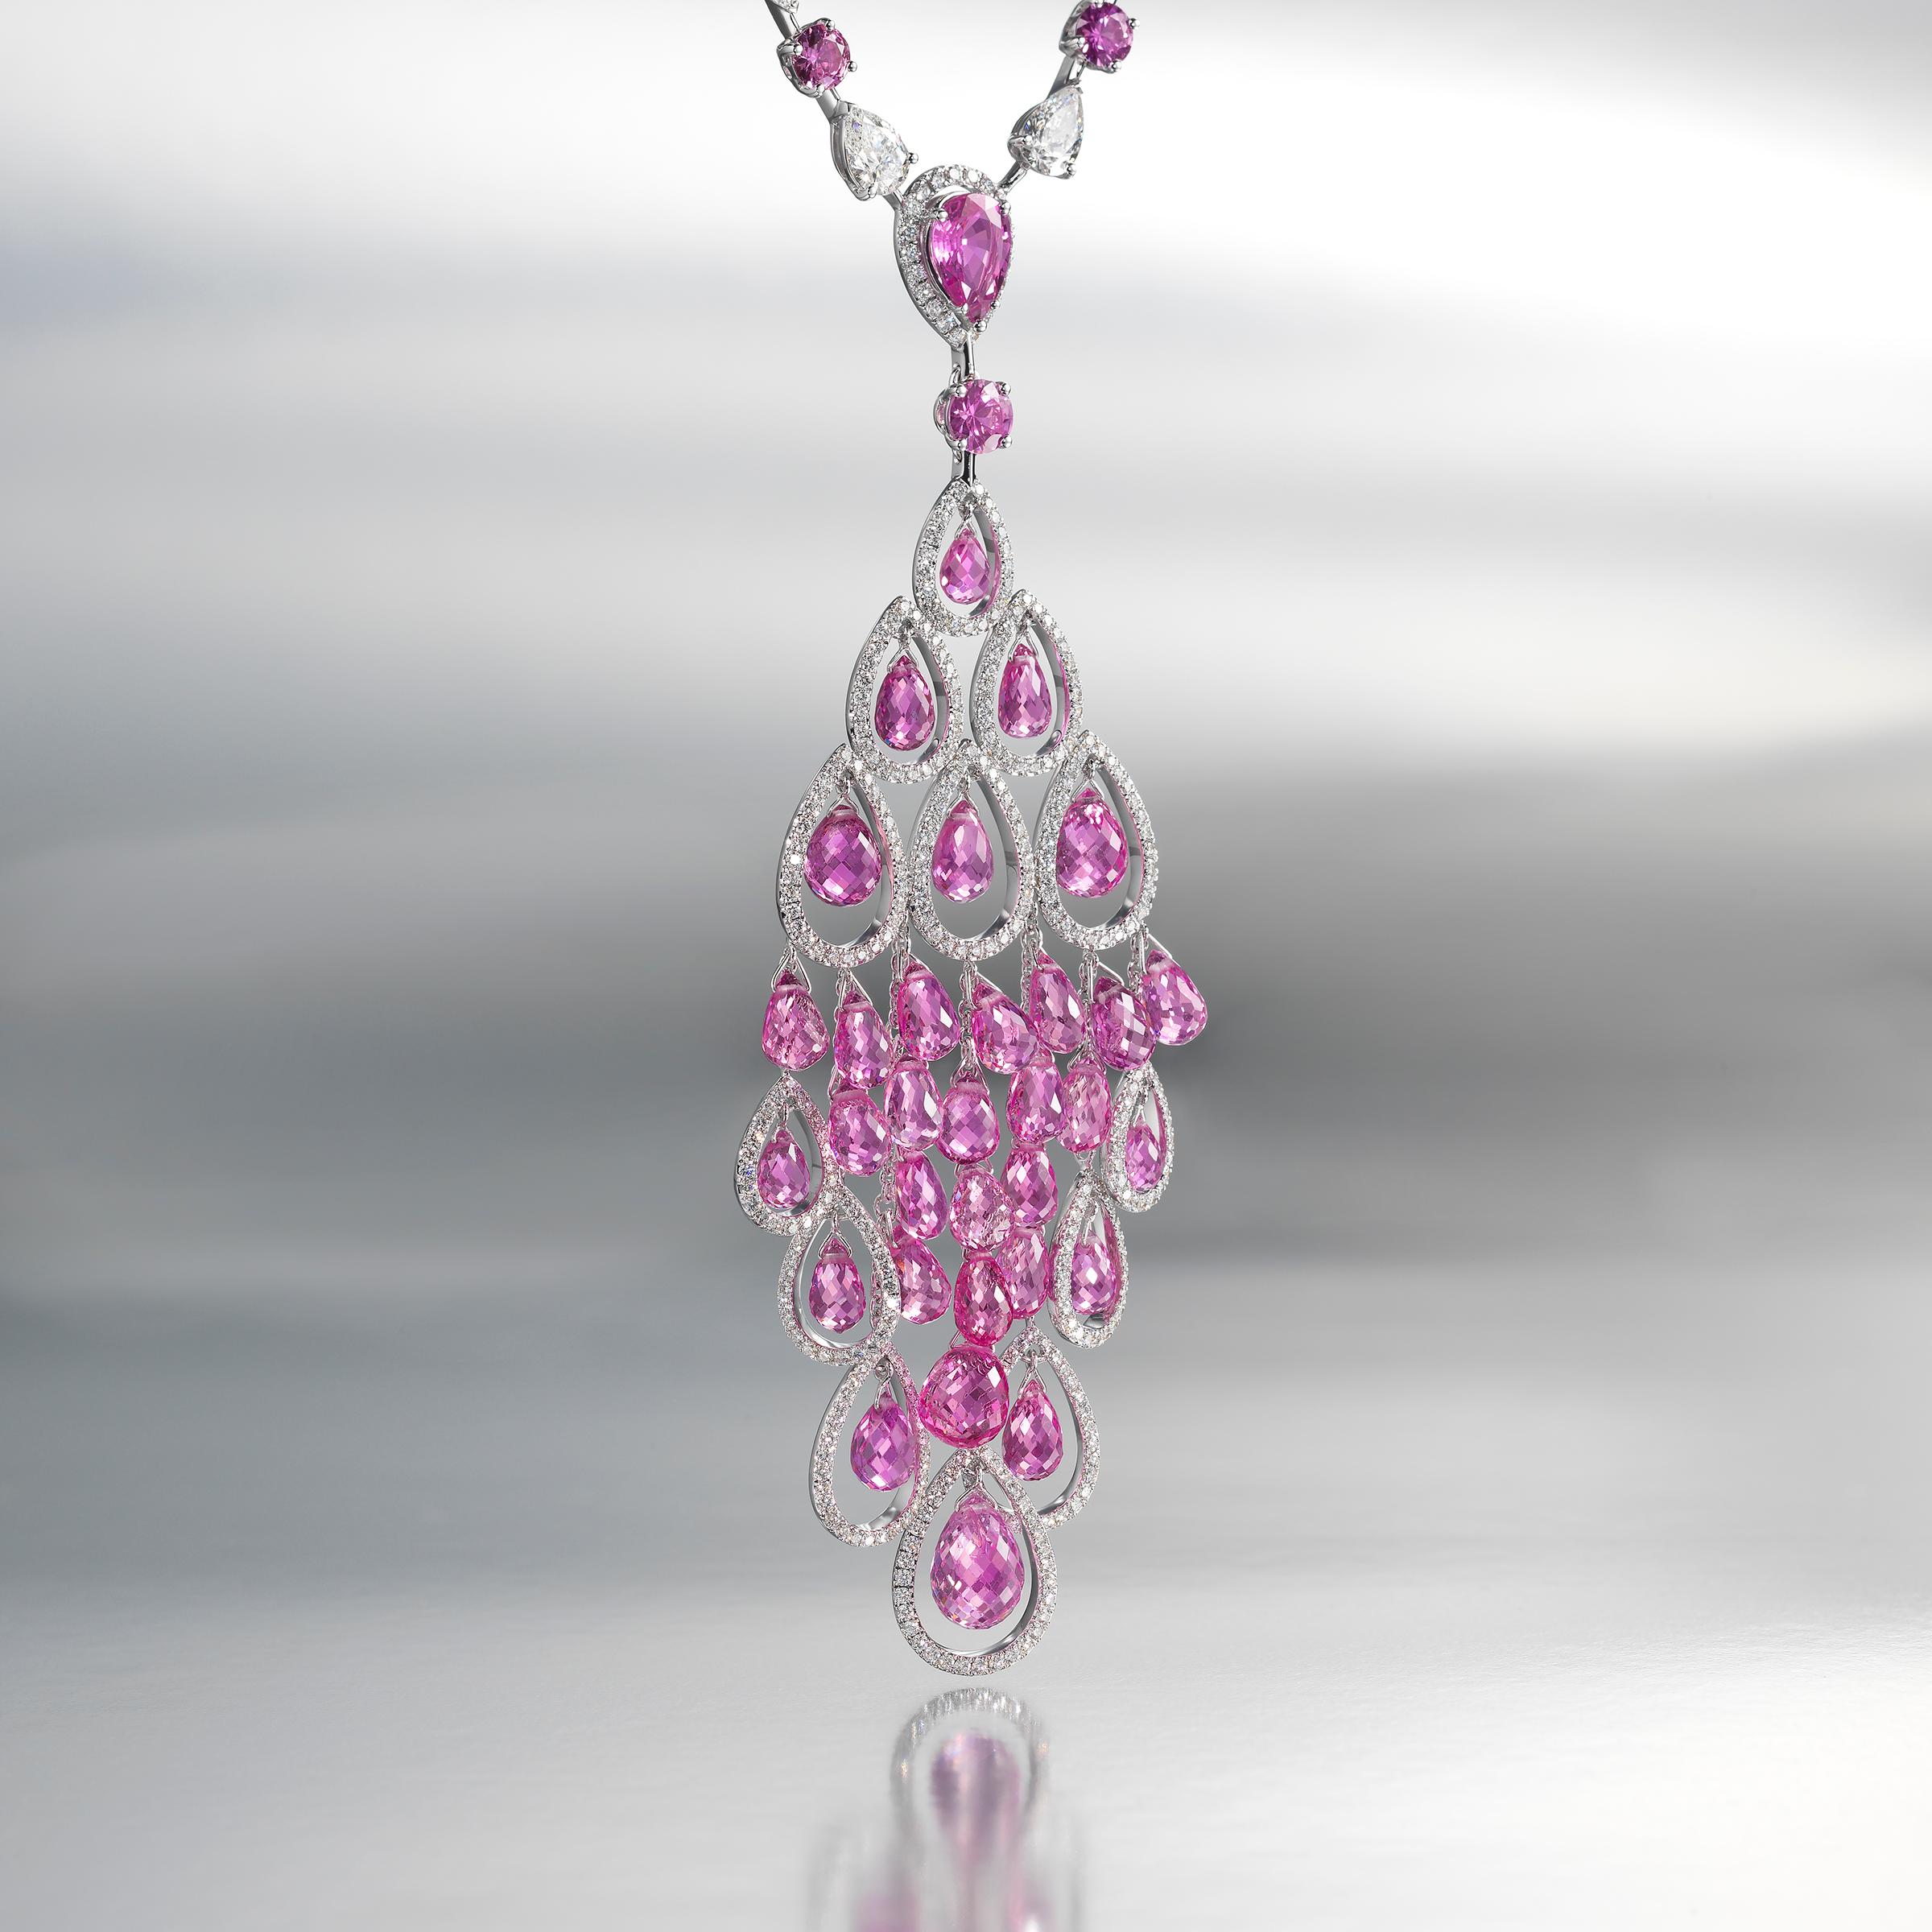 Spectacular Graff diamond and pink sapphire necklace bursting with red-carpet glamour and vibrant style. The necklace sparkles with approximately 12 carats of finest white diamonds which are complemented by over 35 carats of vividly-colored pink